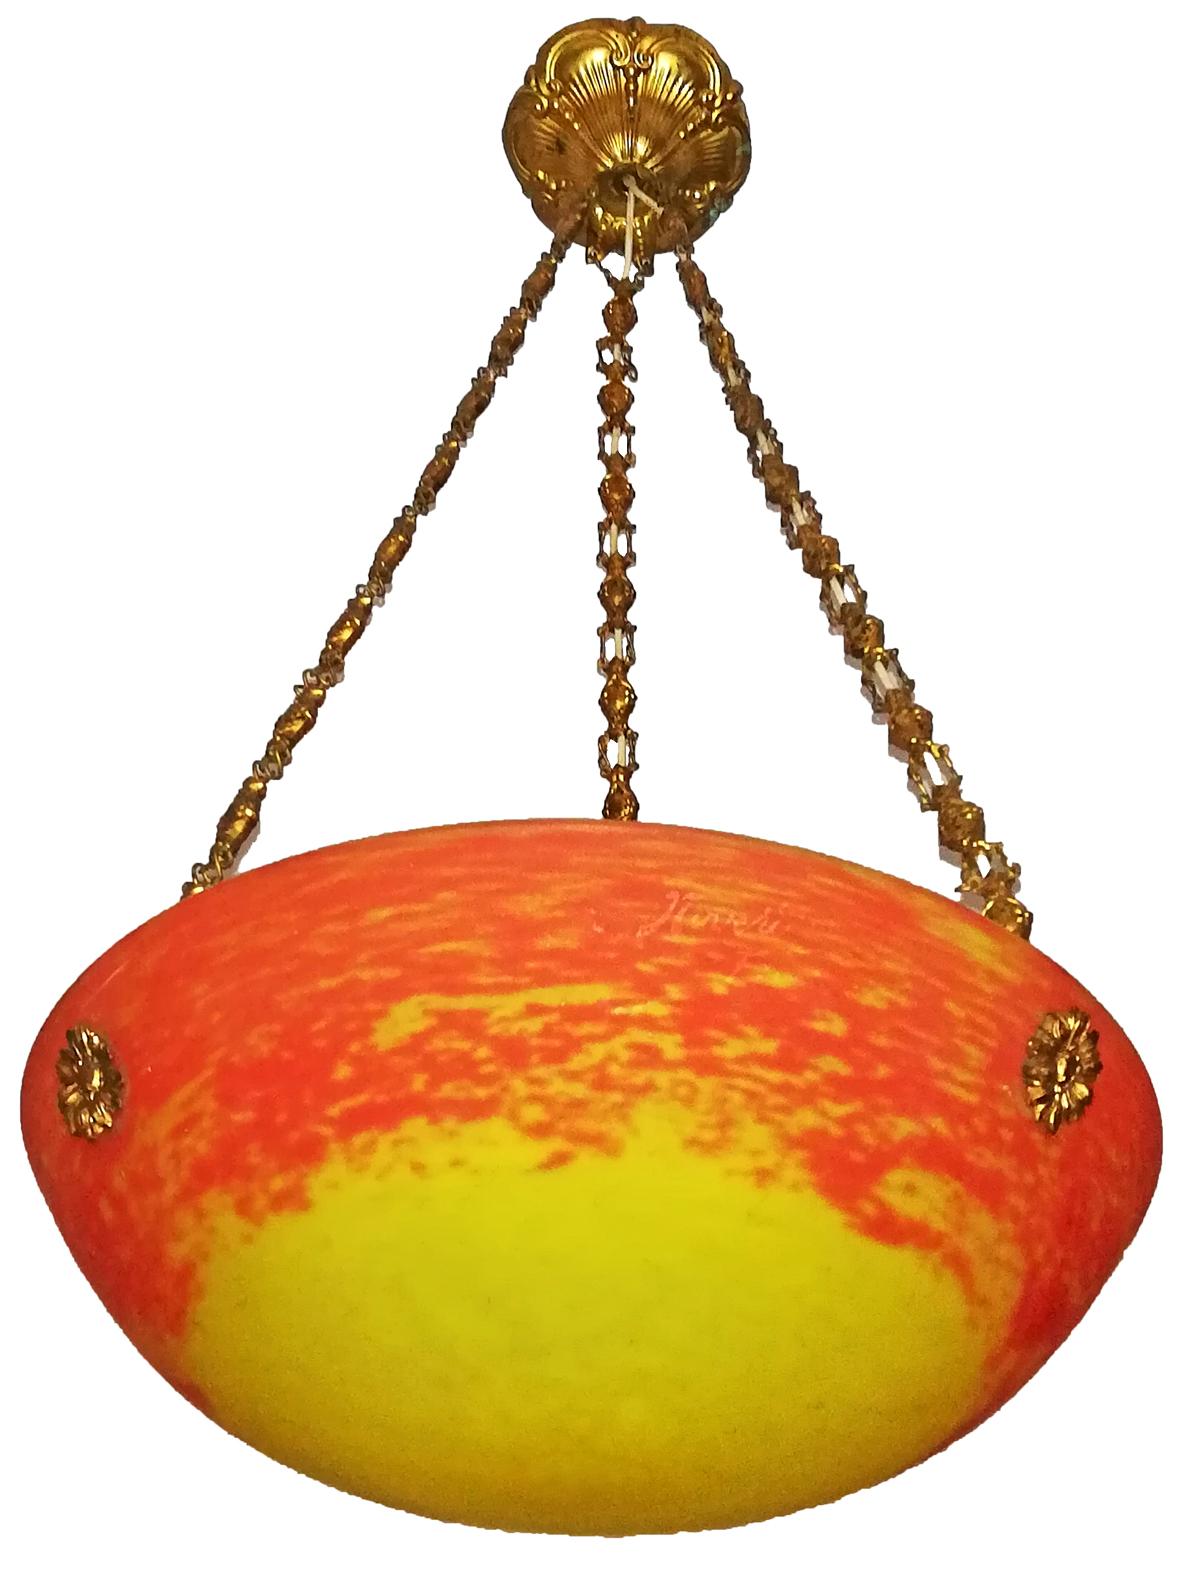 Beautiful signed, French Art Deco gilt chandelier or pendant with colorful orange red, yellow art glass shade in the manner of Degué, Muller Freres and Daum Nancy.

Measures:
Diameter 15 in / 36 cm 
Height 28 in / 70 cm
Weight 7 lb. (3 kg)